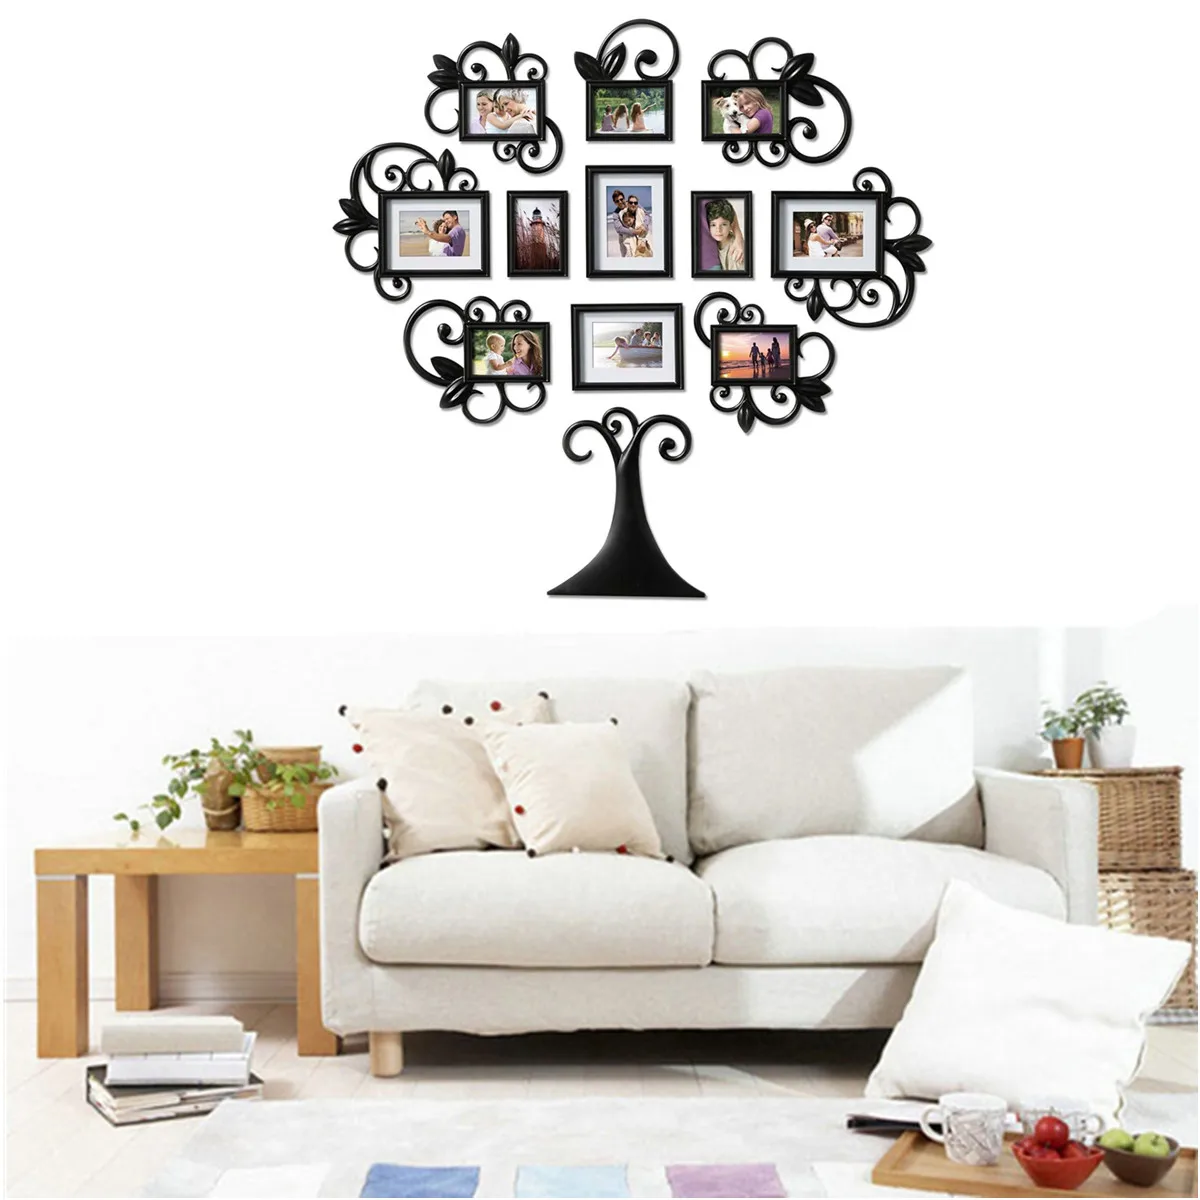 Tree Type Acrylic Photo Wall Family Picture Frame Collage Art Home Decor Sticker 